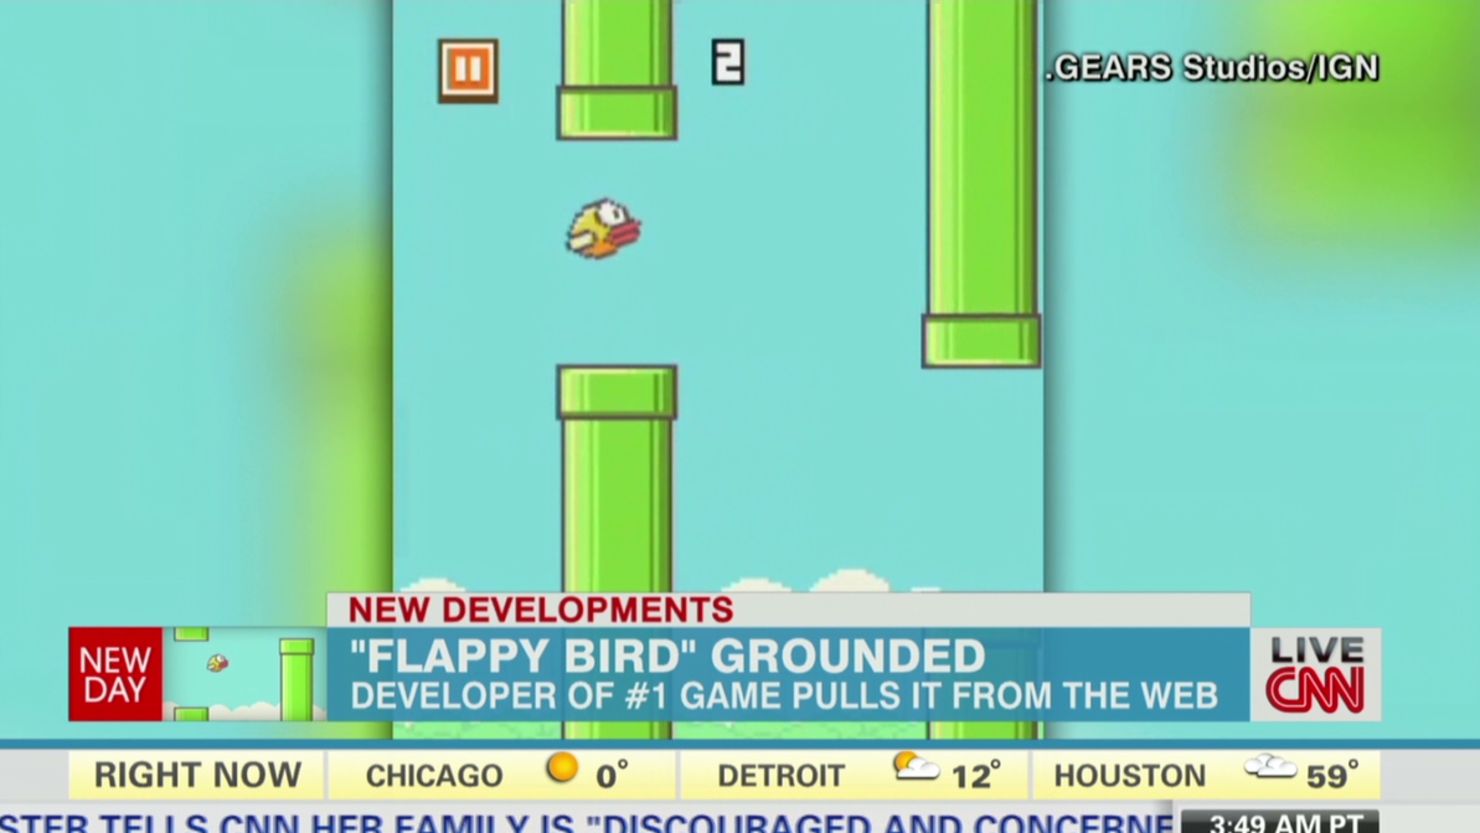 Flappy Bird removed from Google Play Store, iOS App Store - Neowin